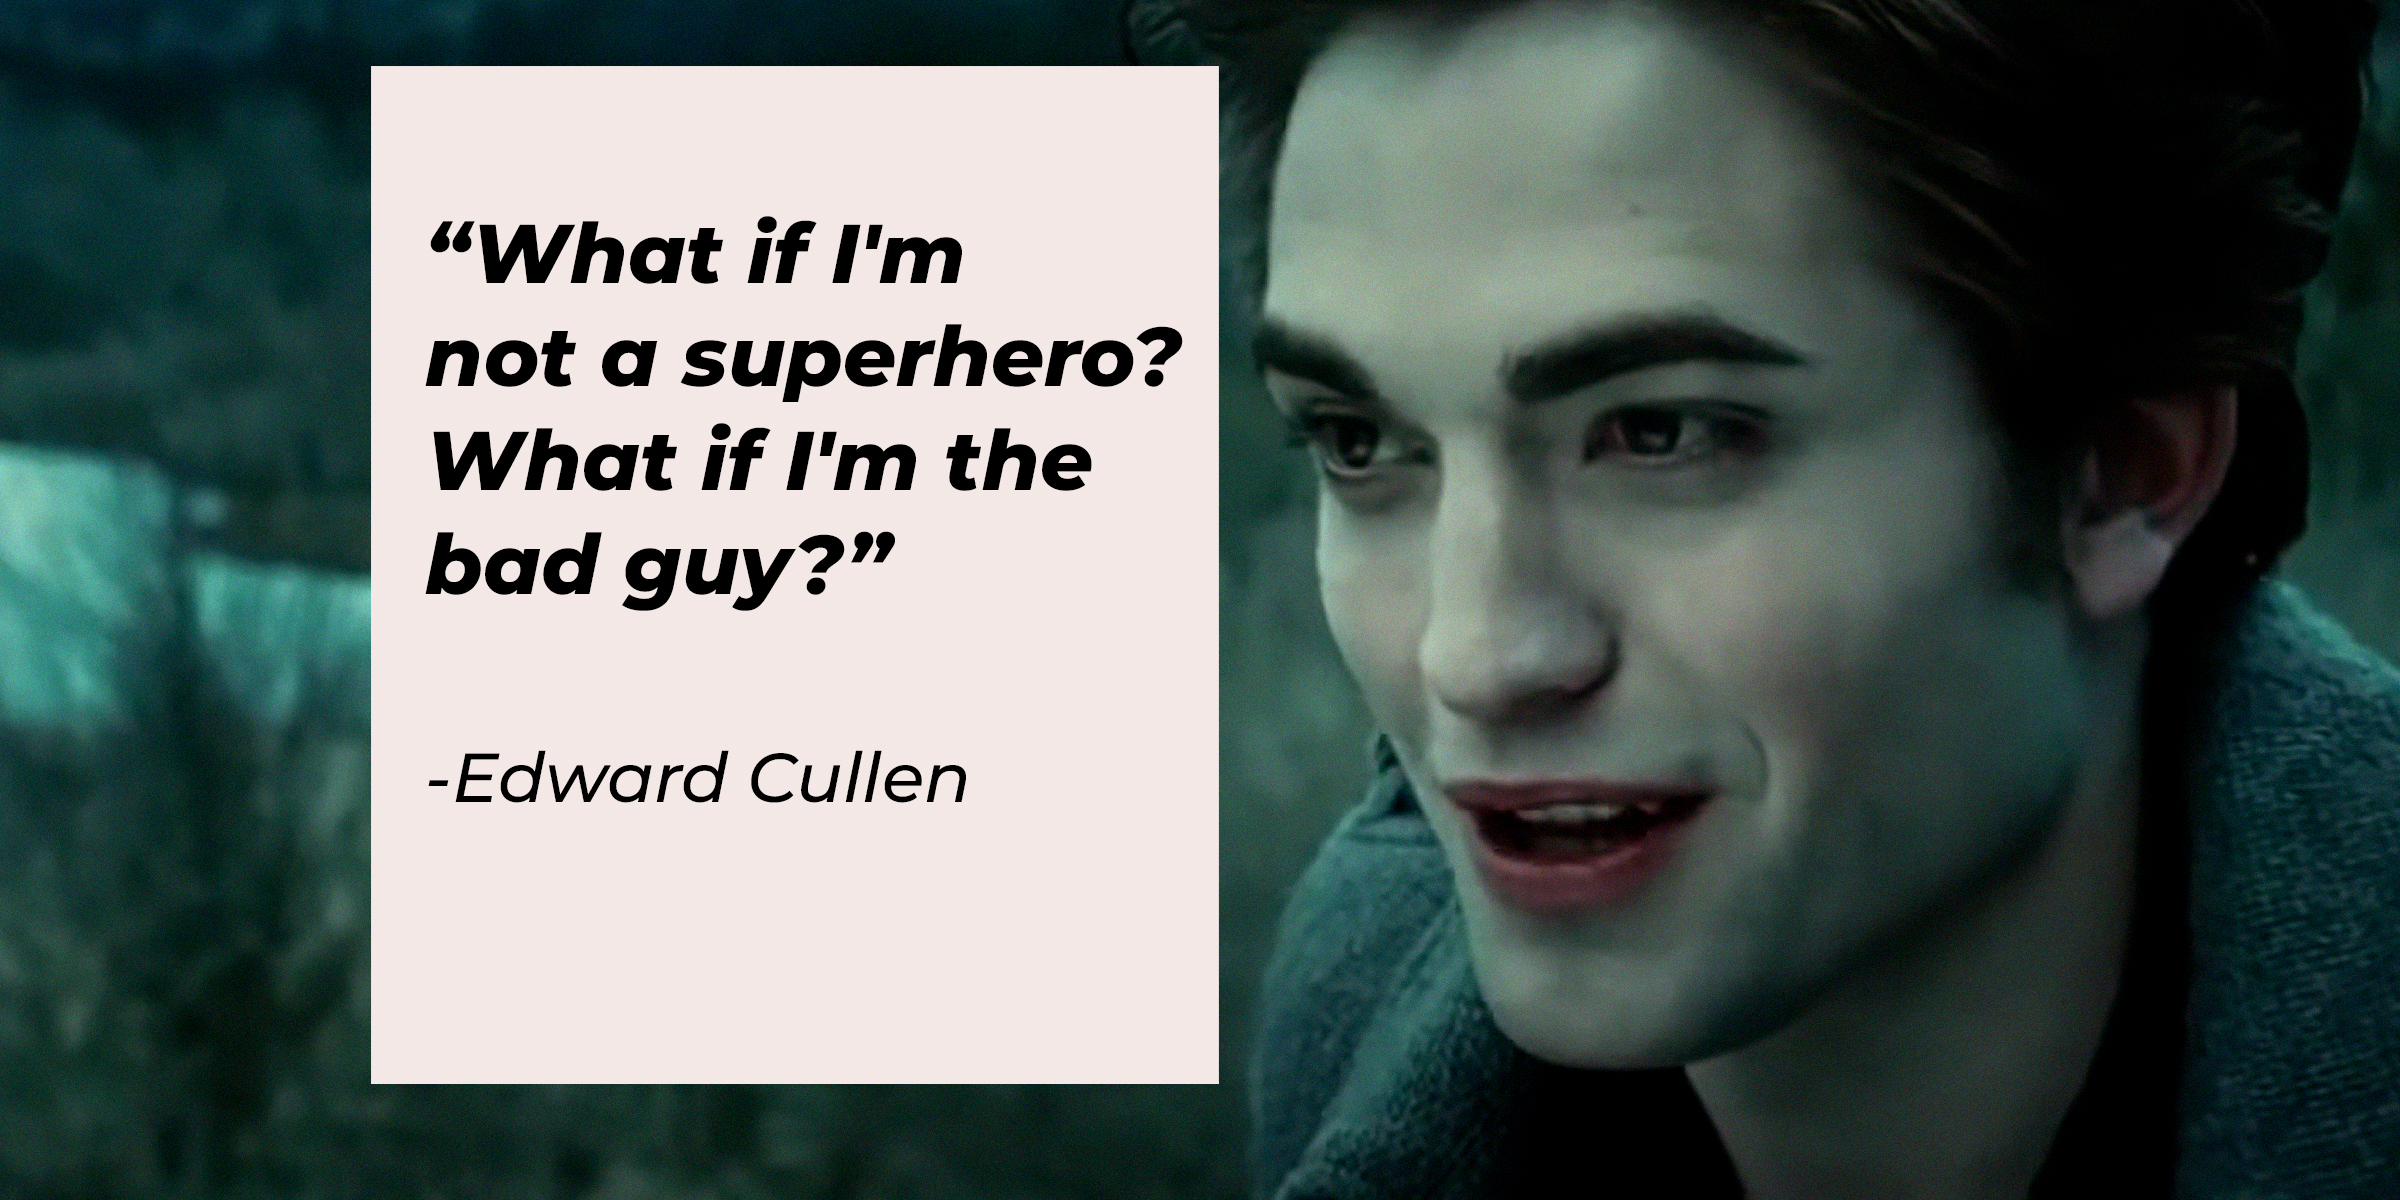 Edward Cullen's quote: “What if I'm not a superhero? What if I'm the bad guy?” | Source: facebook.com/twilight